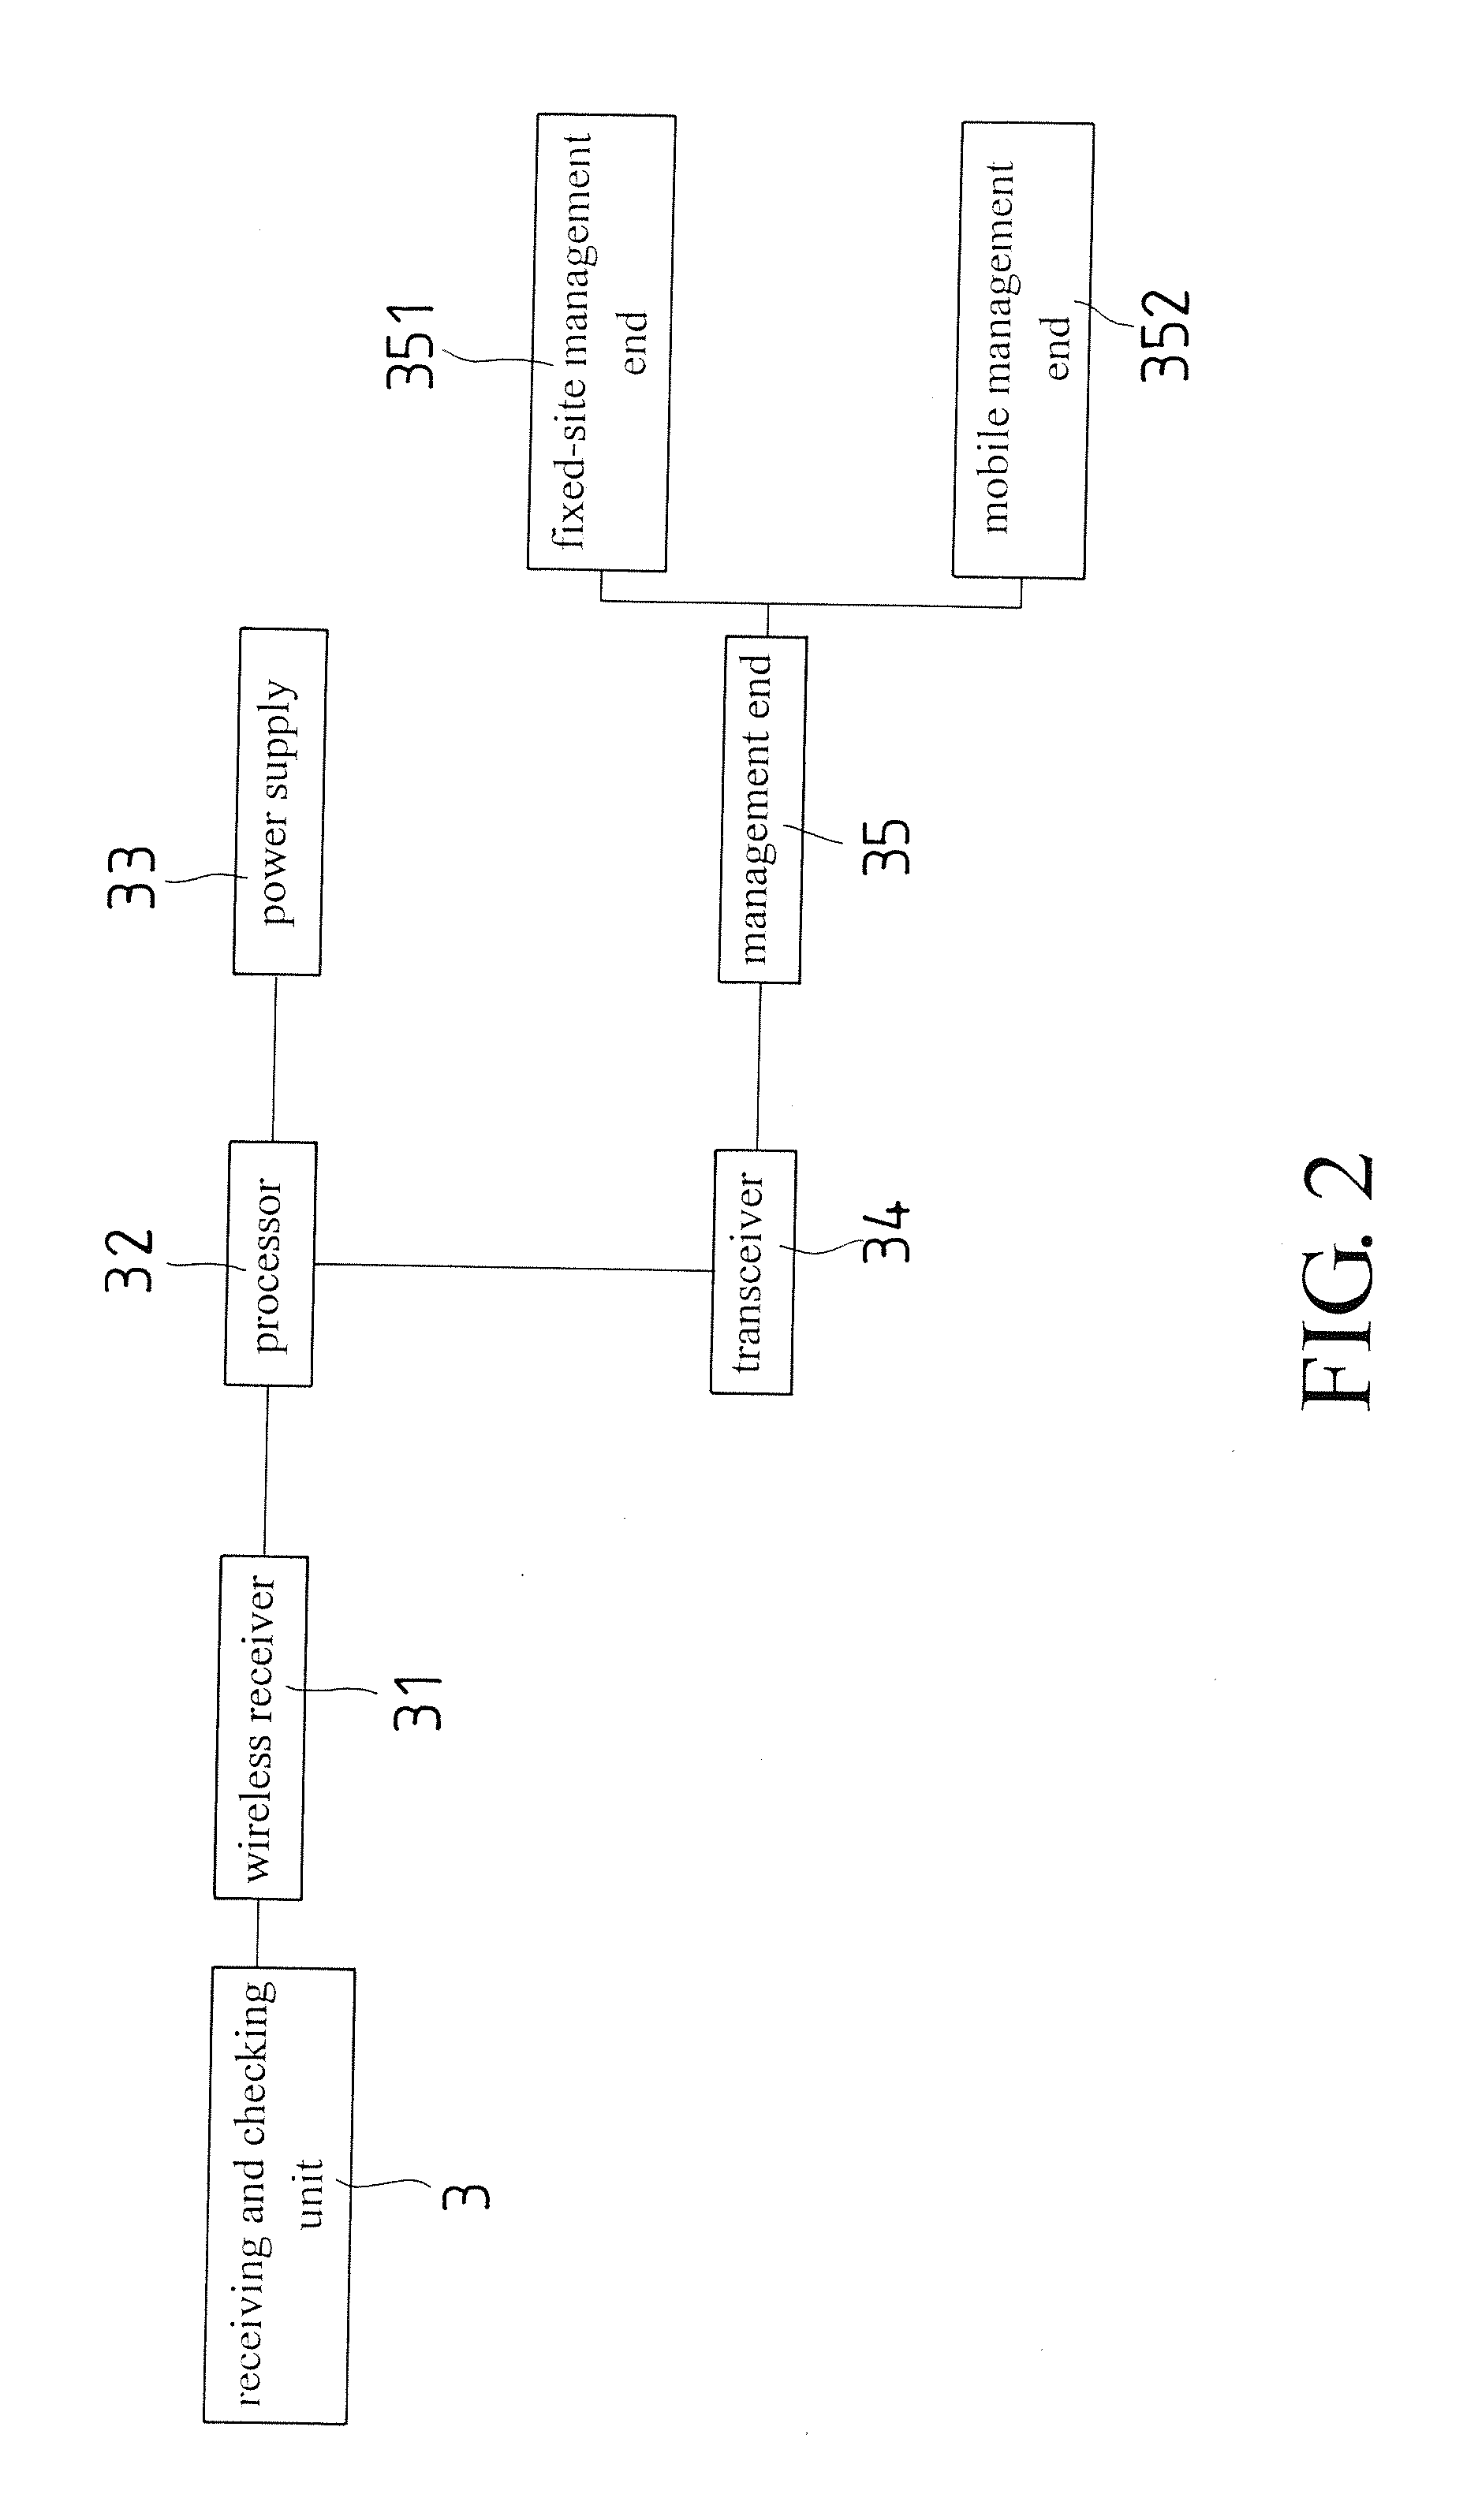 Body fluid absorption object wetting alarm method and apparatus